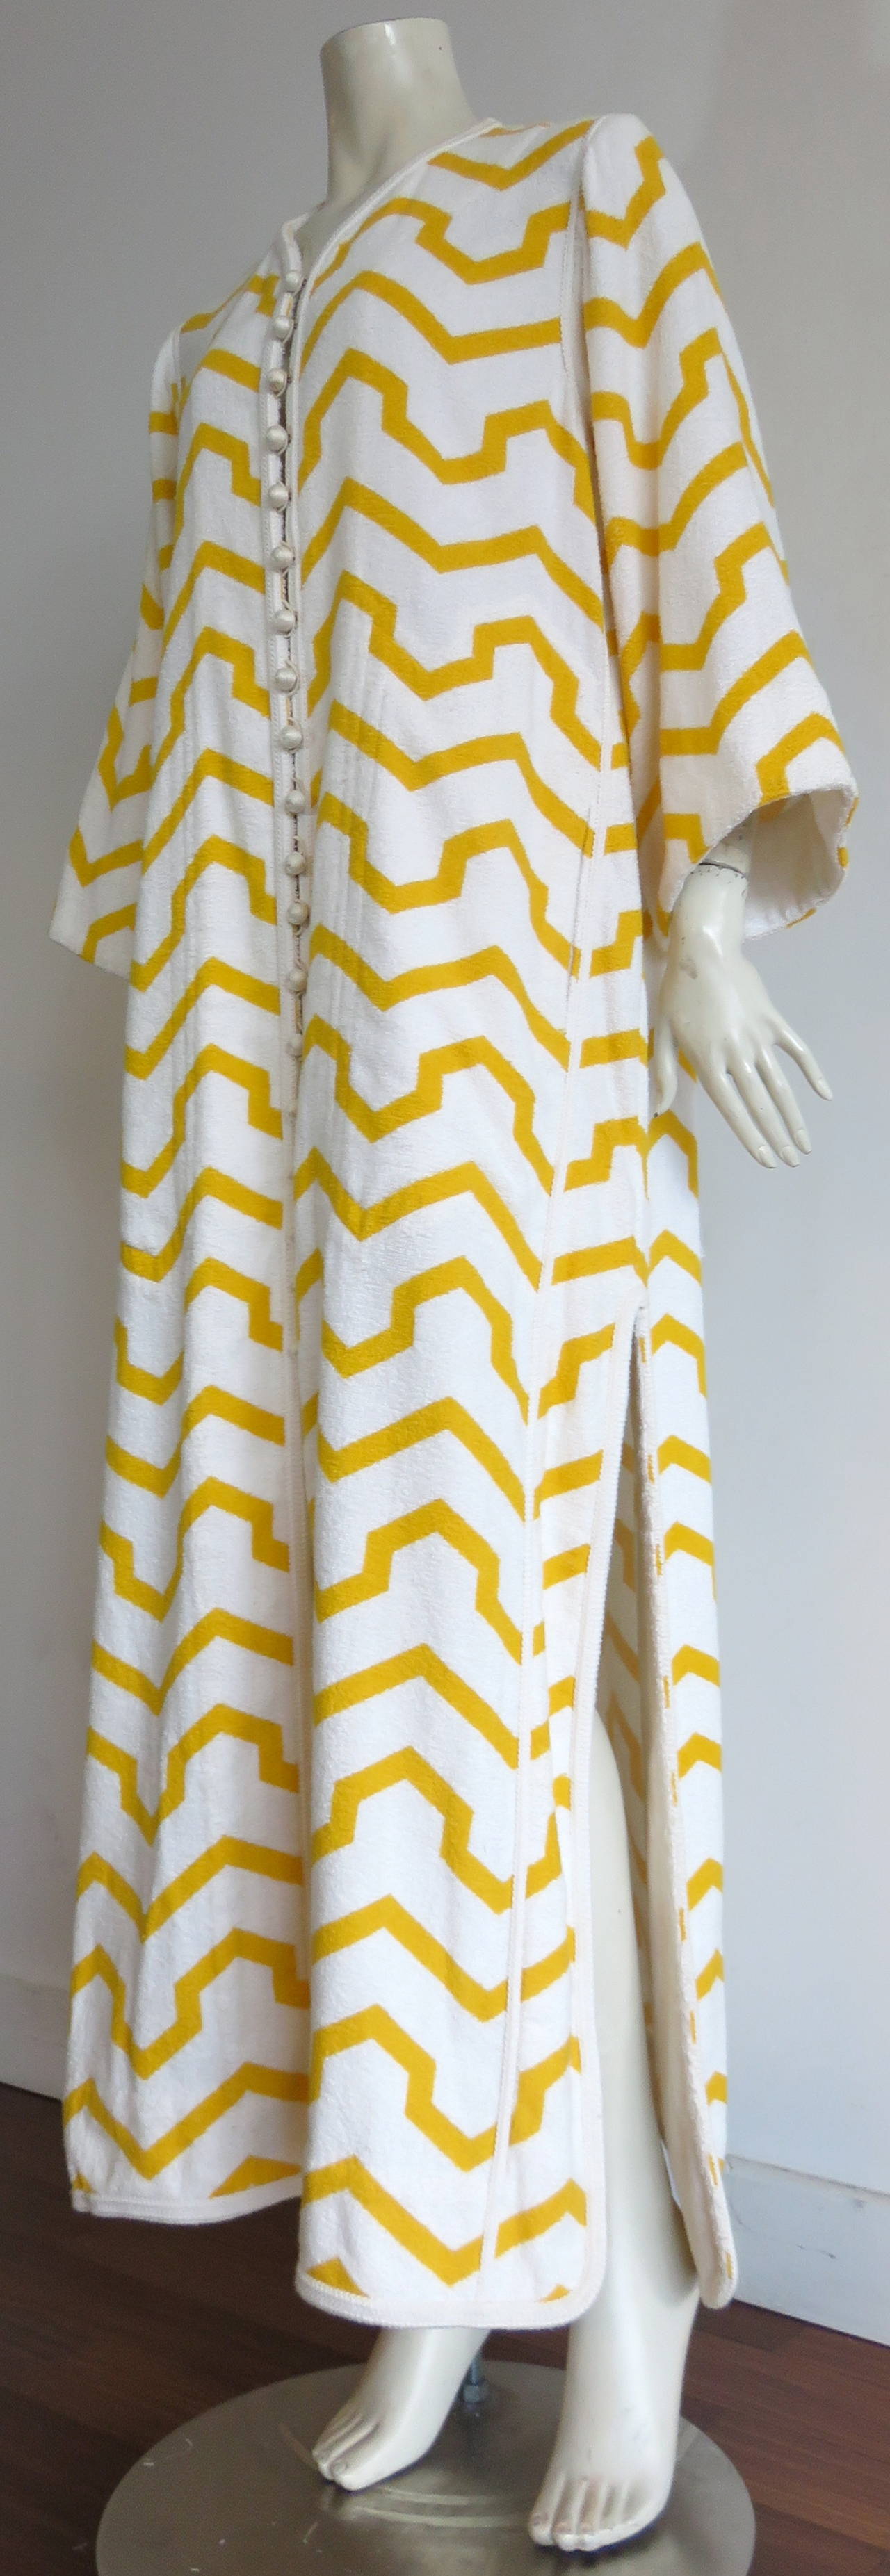 Excellent condition, 1970's GIVENCHY Couture, golden yellow, chevron-striped caftan/robe.

White, cotton, french terry base cloth fabrication with Moroccan-style, white braided trims, and thread-spun, ball button closures at front